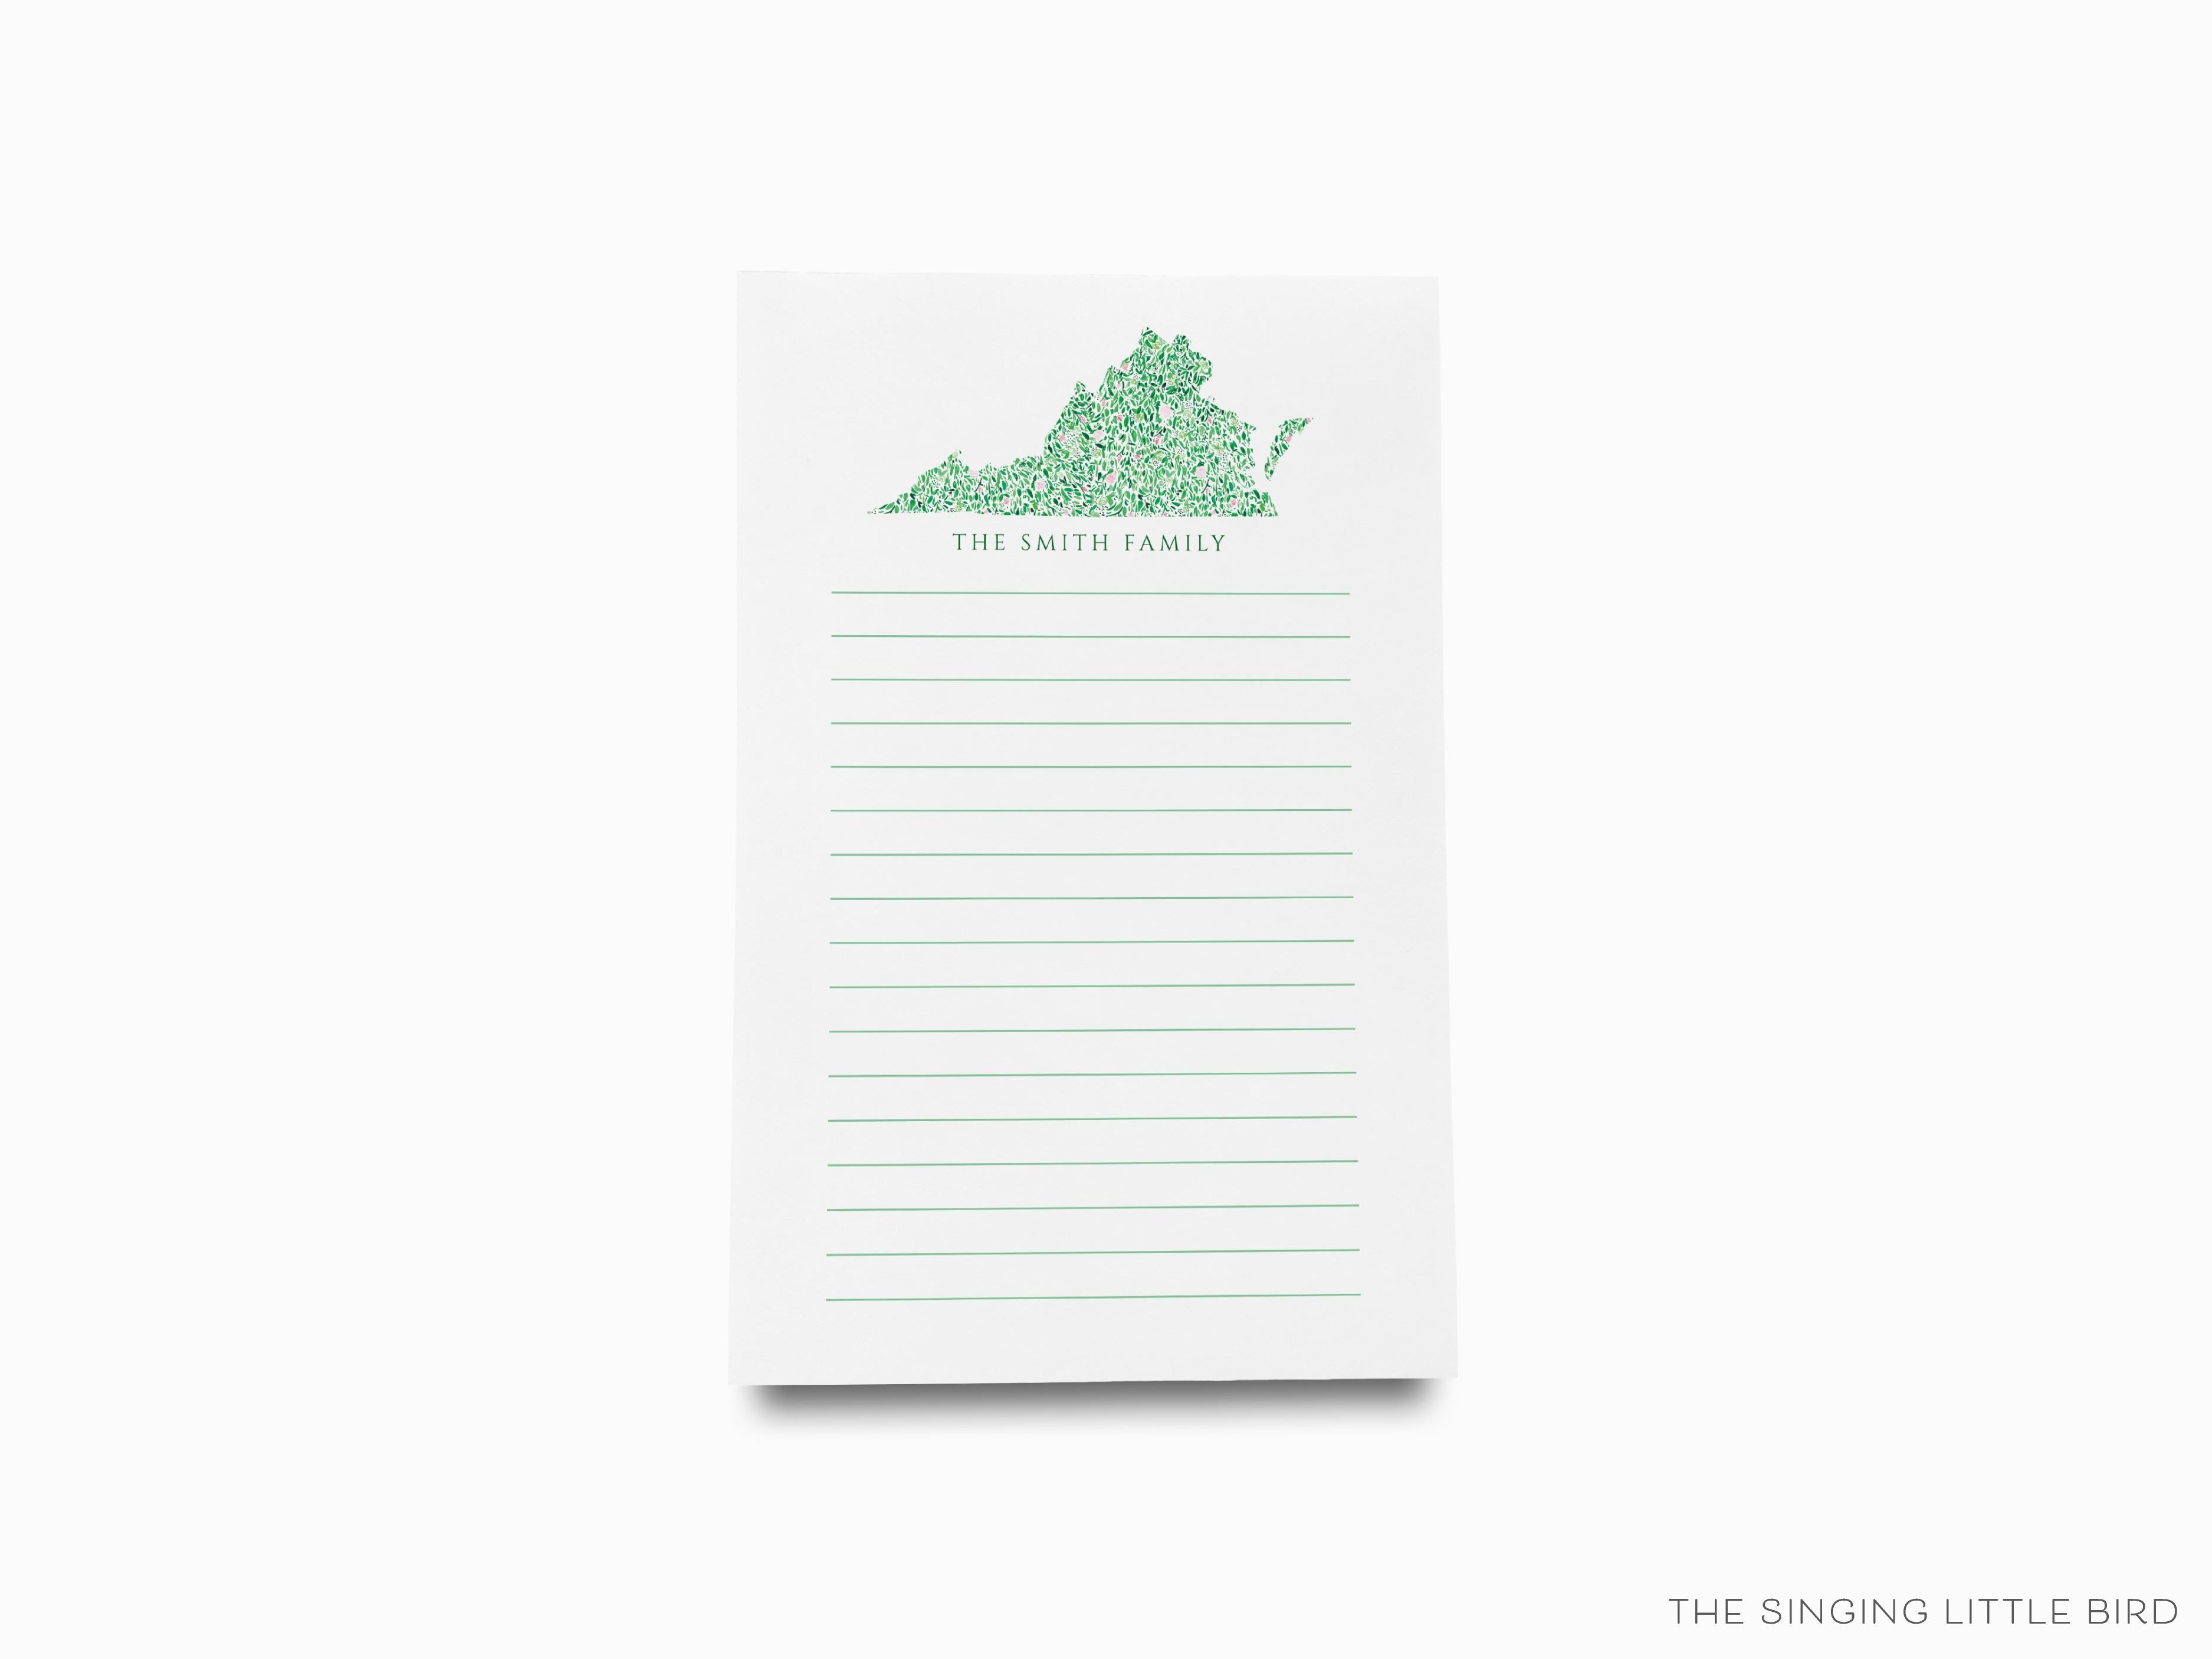 Personalized State of Virginia Notepad-These personalized notepads feature our hand-painted watercolor floral pattern in the shape of Virginia, printed in the USA on a beautiful smooth stock. You choose which size you want (or bundled together for a beautiful gift set) and makes a great gift for the checklist and Virginian lover in your life.-The Singing Little Bird